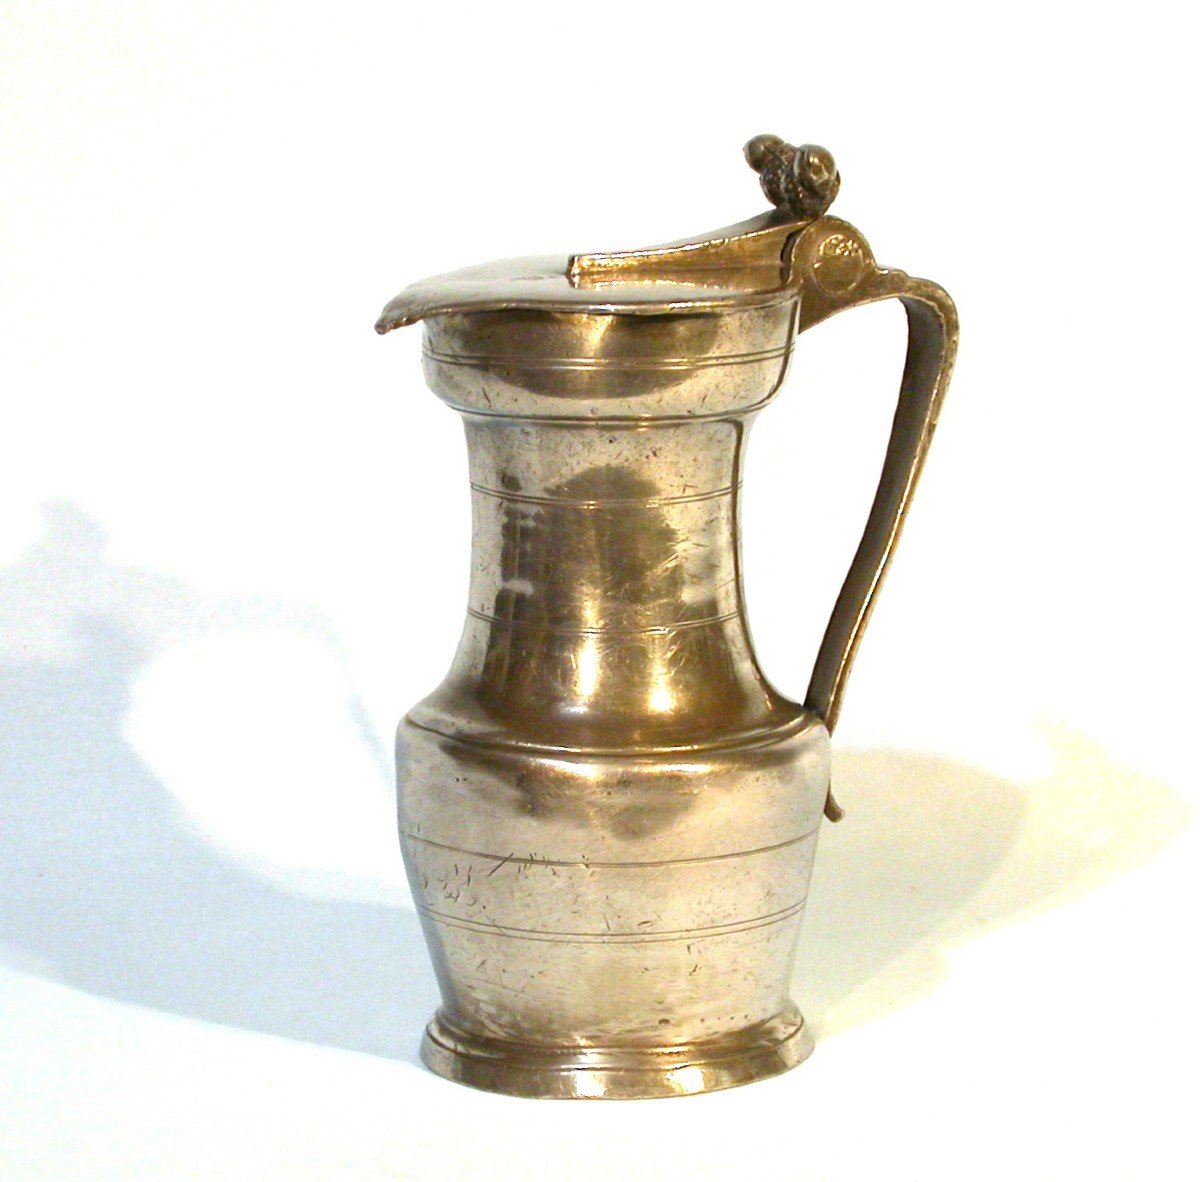 Rare Pewter Wine Pitcher - Beaucaire, 18th Century